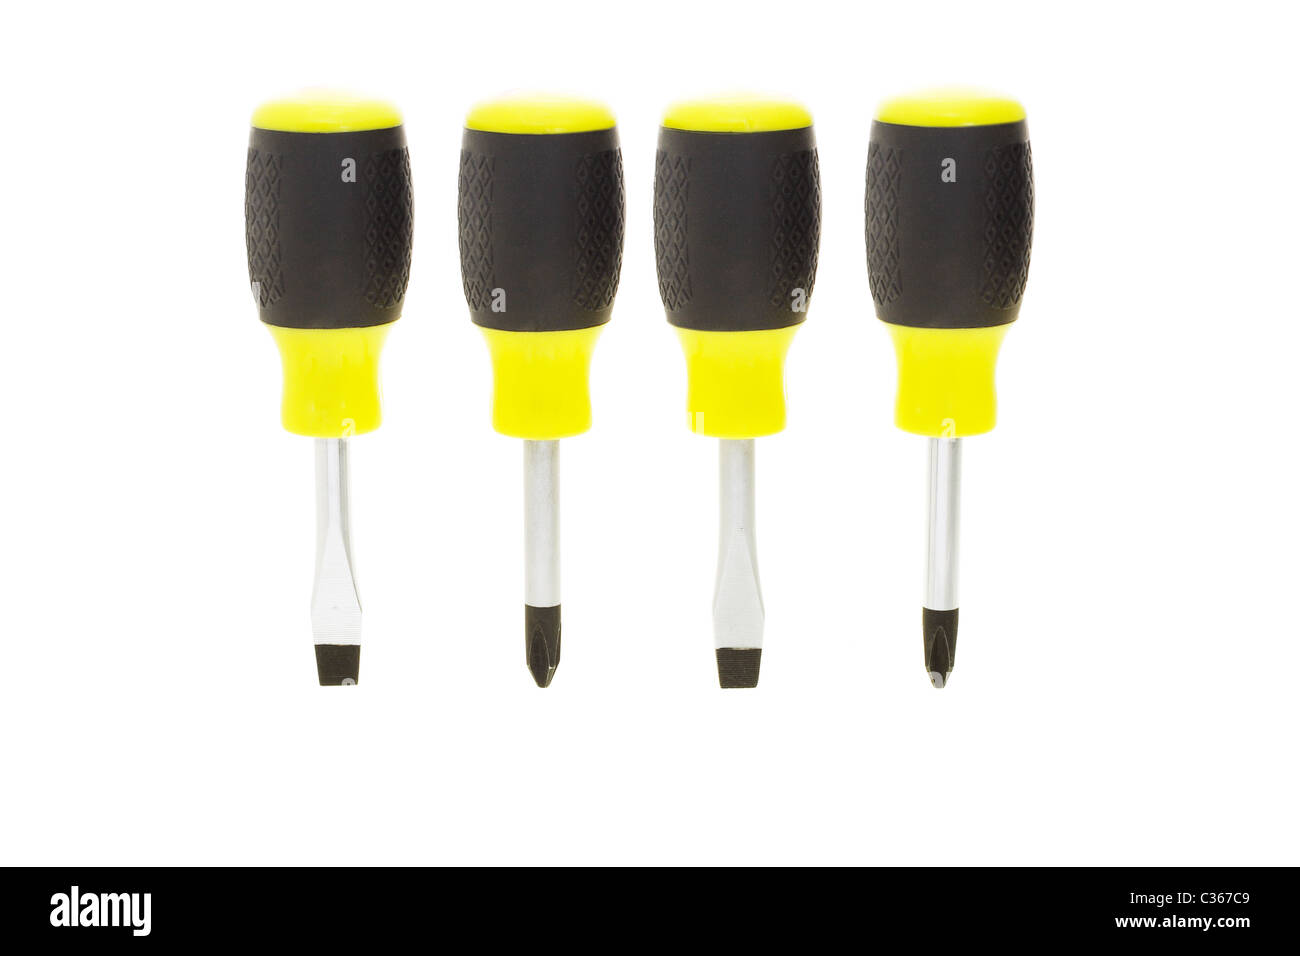 Four screwdrivers standing upright on white background Stock Photo